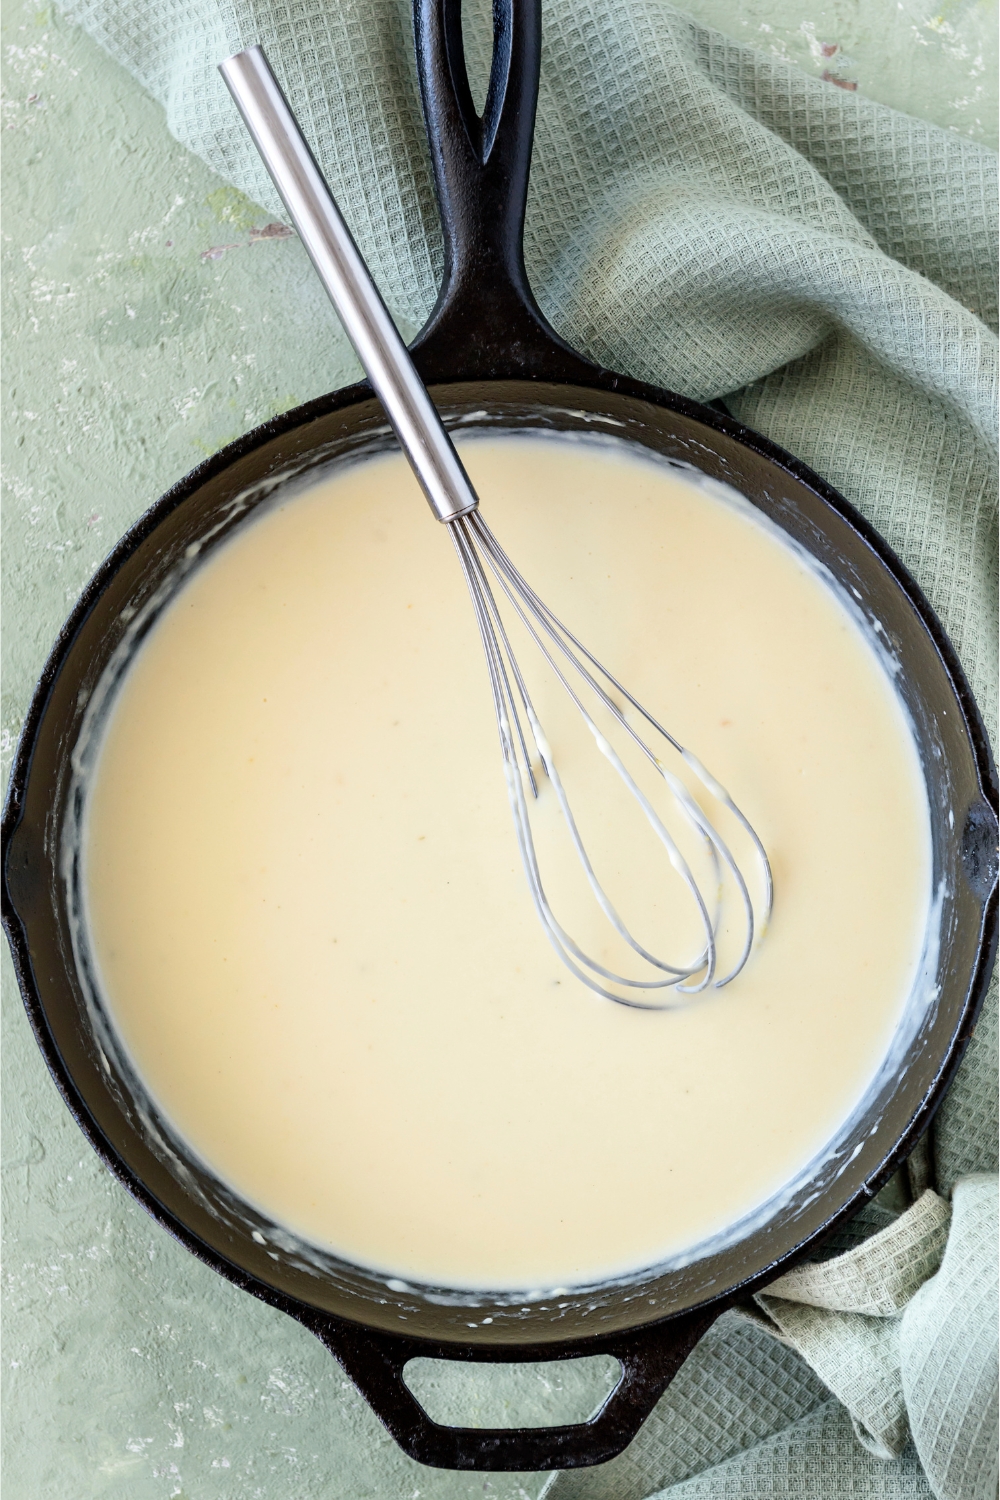 A cast iron skillet filled with cream sauce and a whisk is in the skillet.